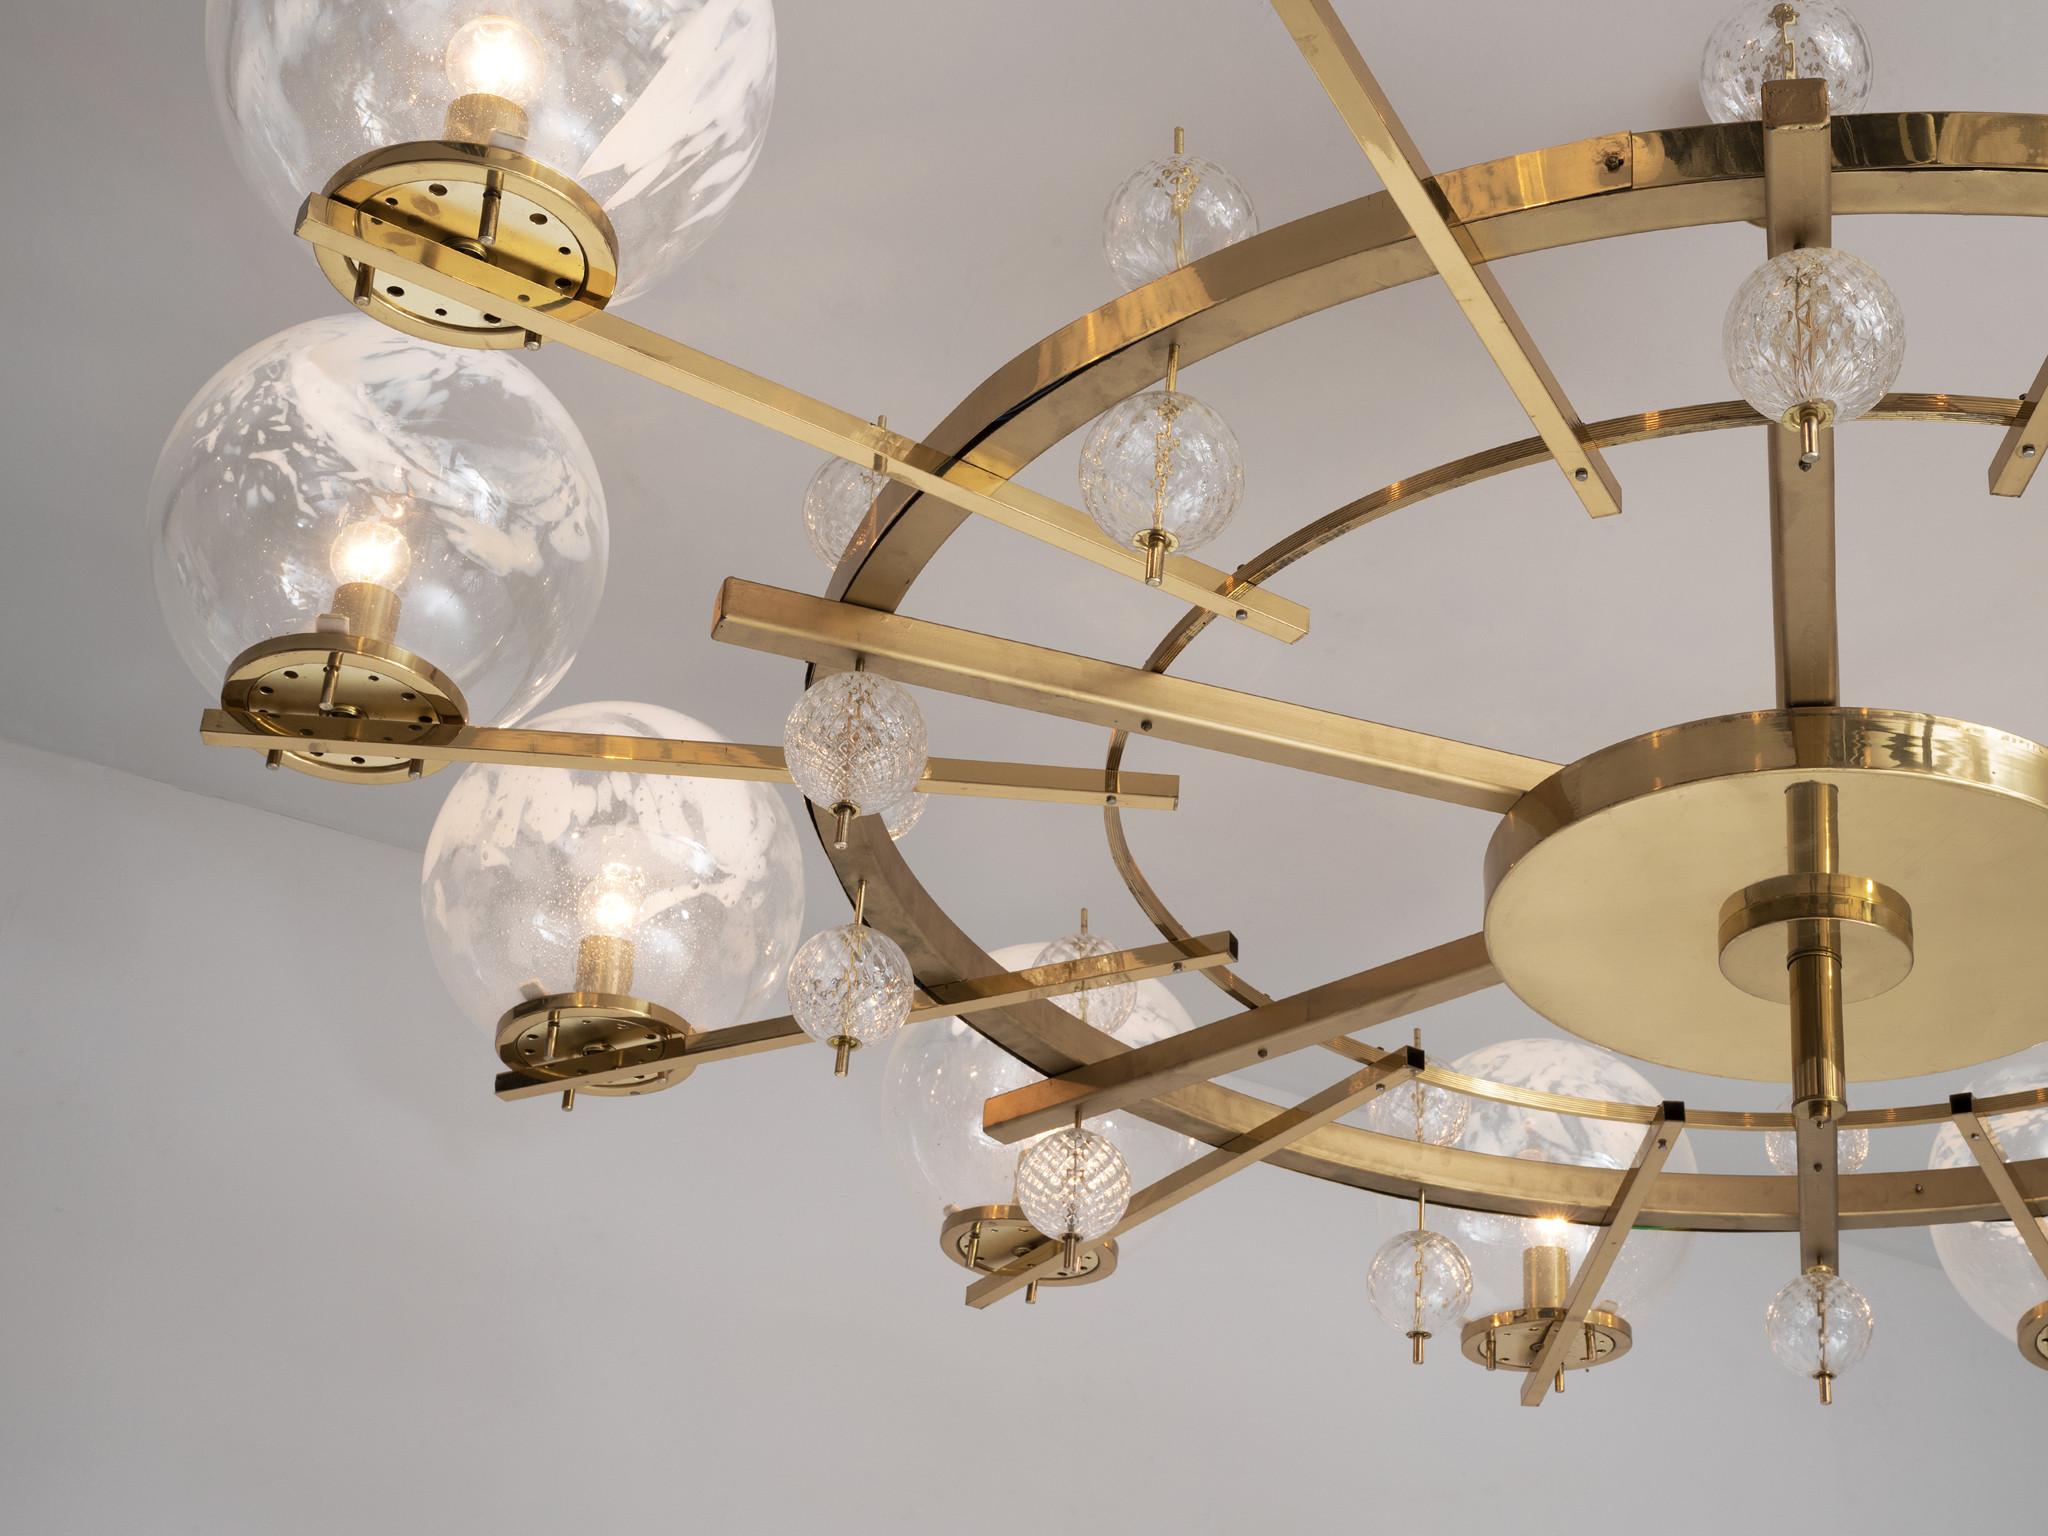 Grand Chandelier in Brass and Art-Glass Spheres 8.5 feet